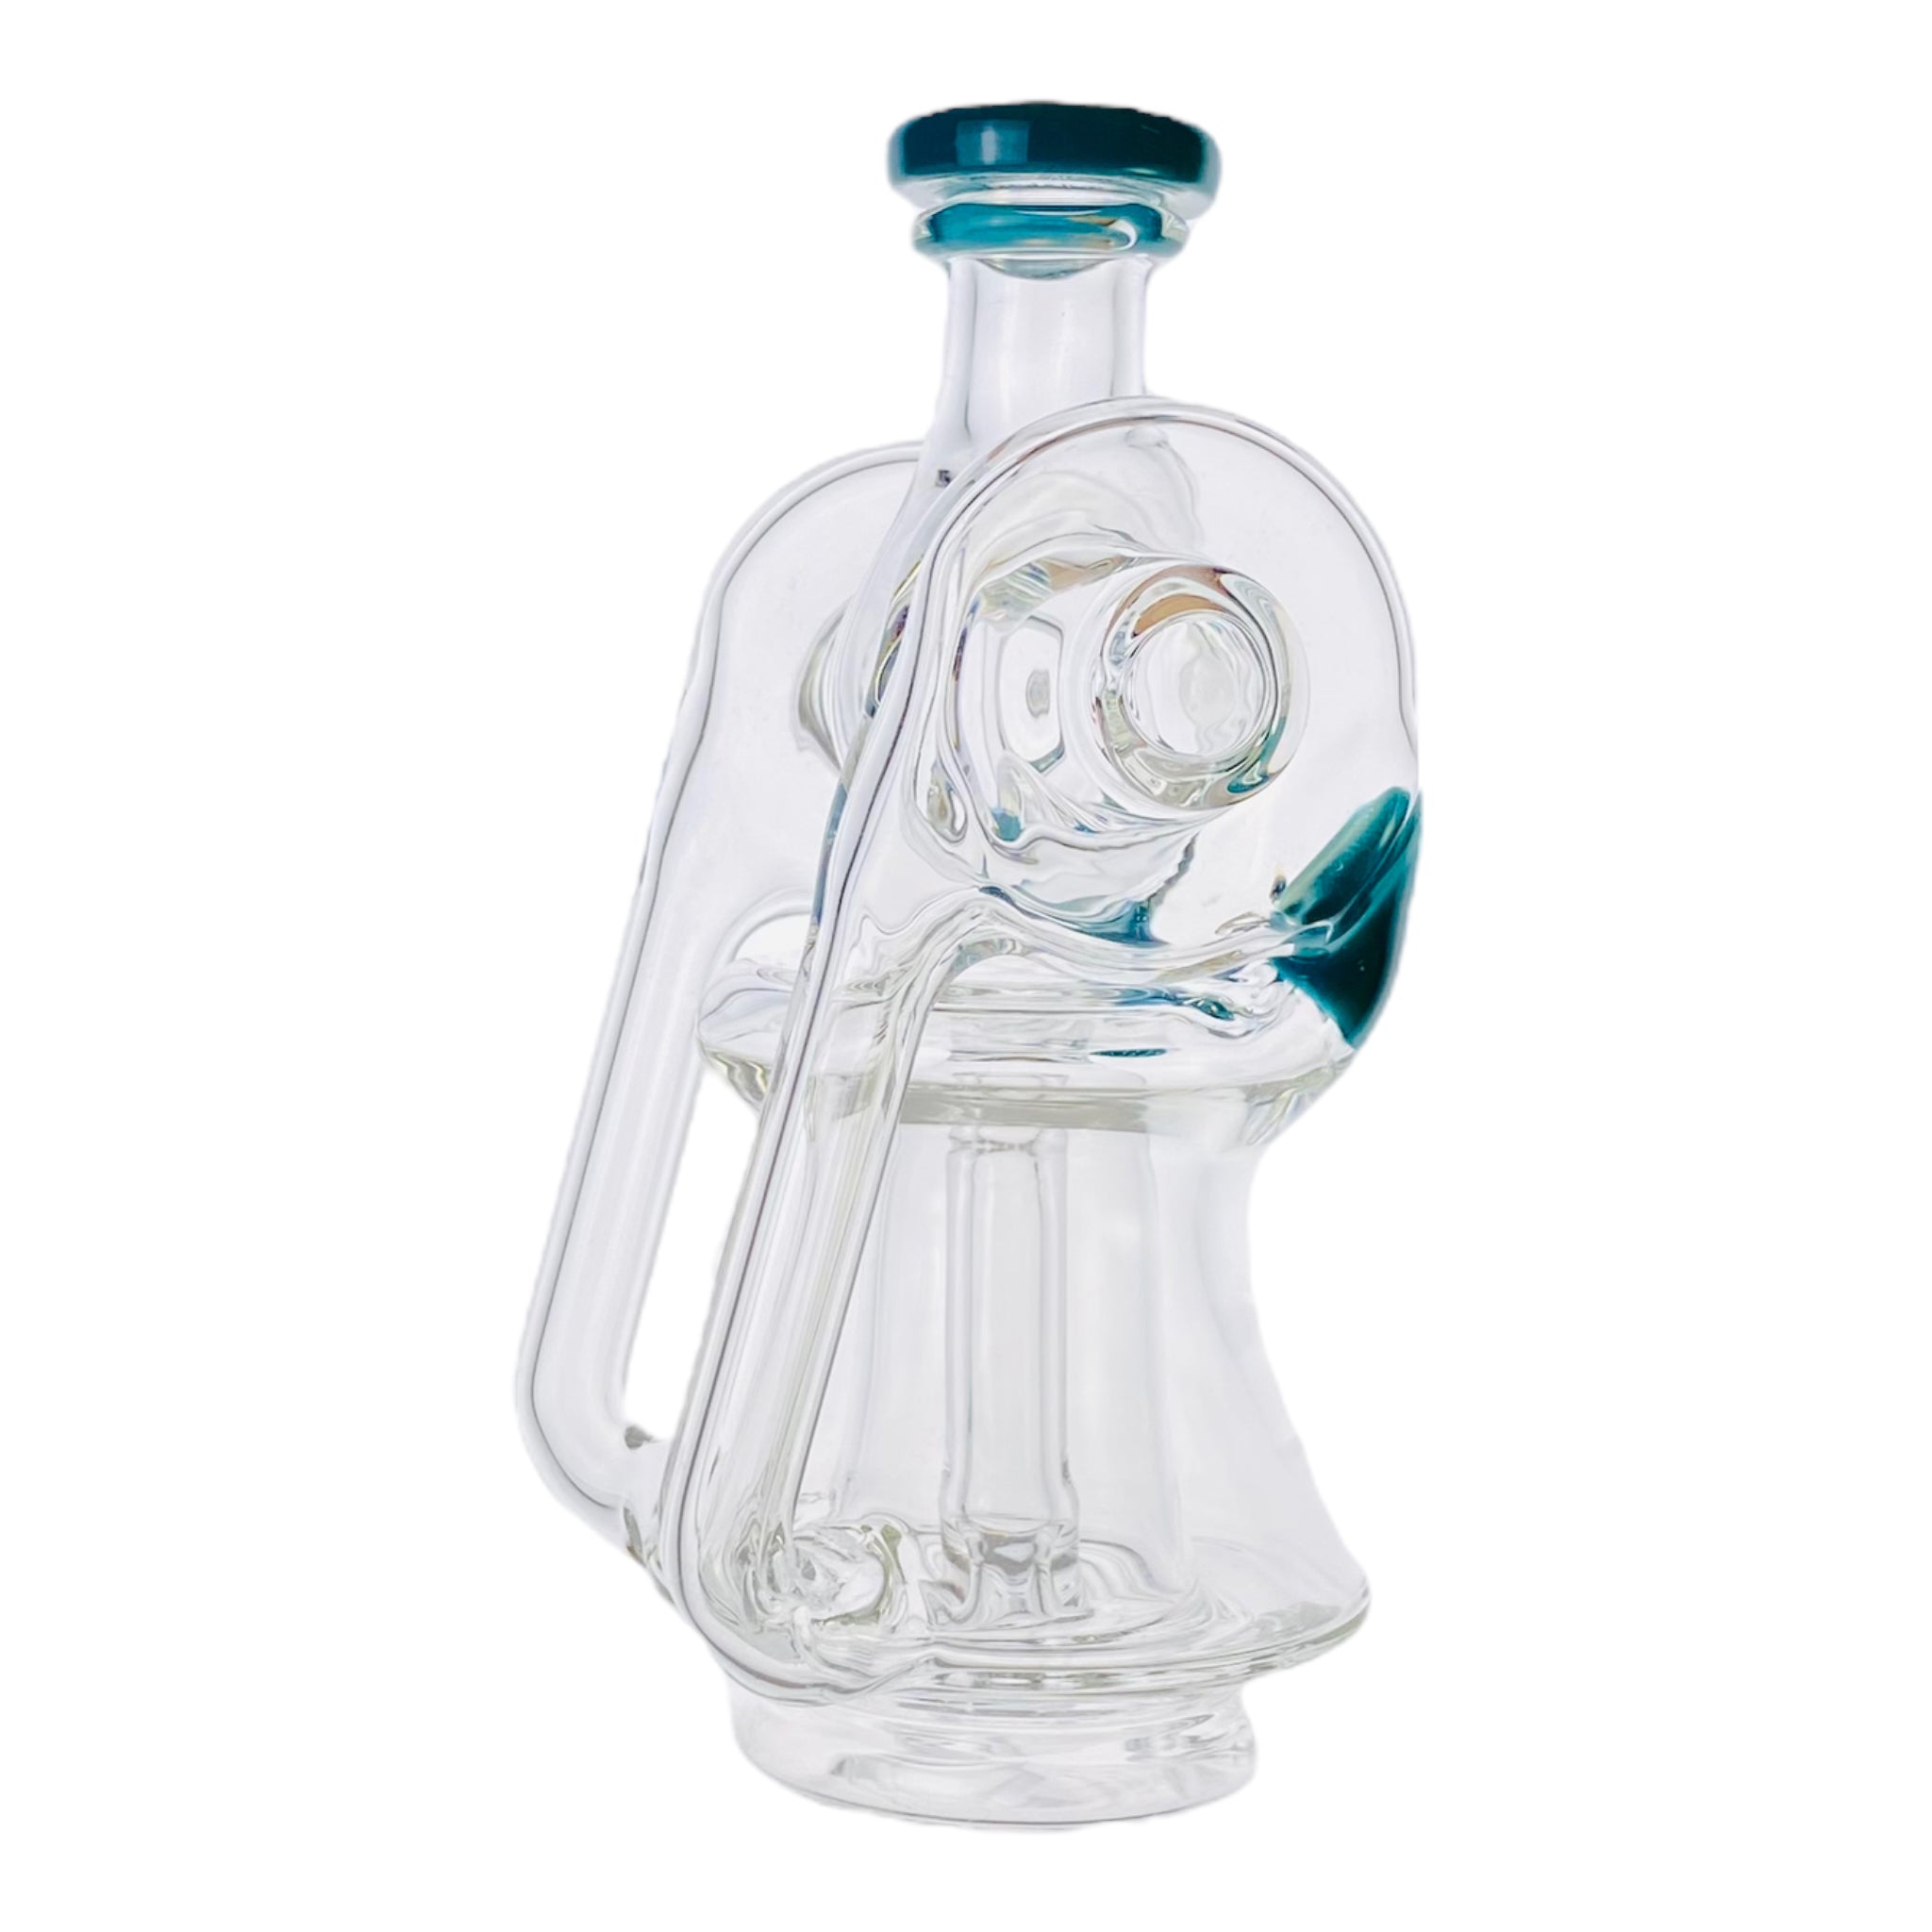 Ery Glass - Puffco Peak Glass Attachment - Double Uptake Recycler for sale mighty quinn santa rosa best peak top